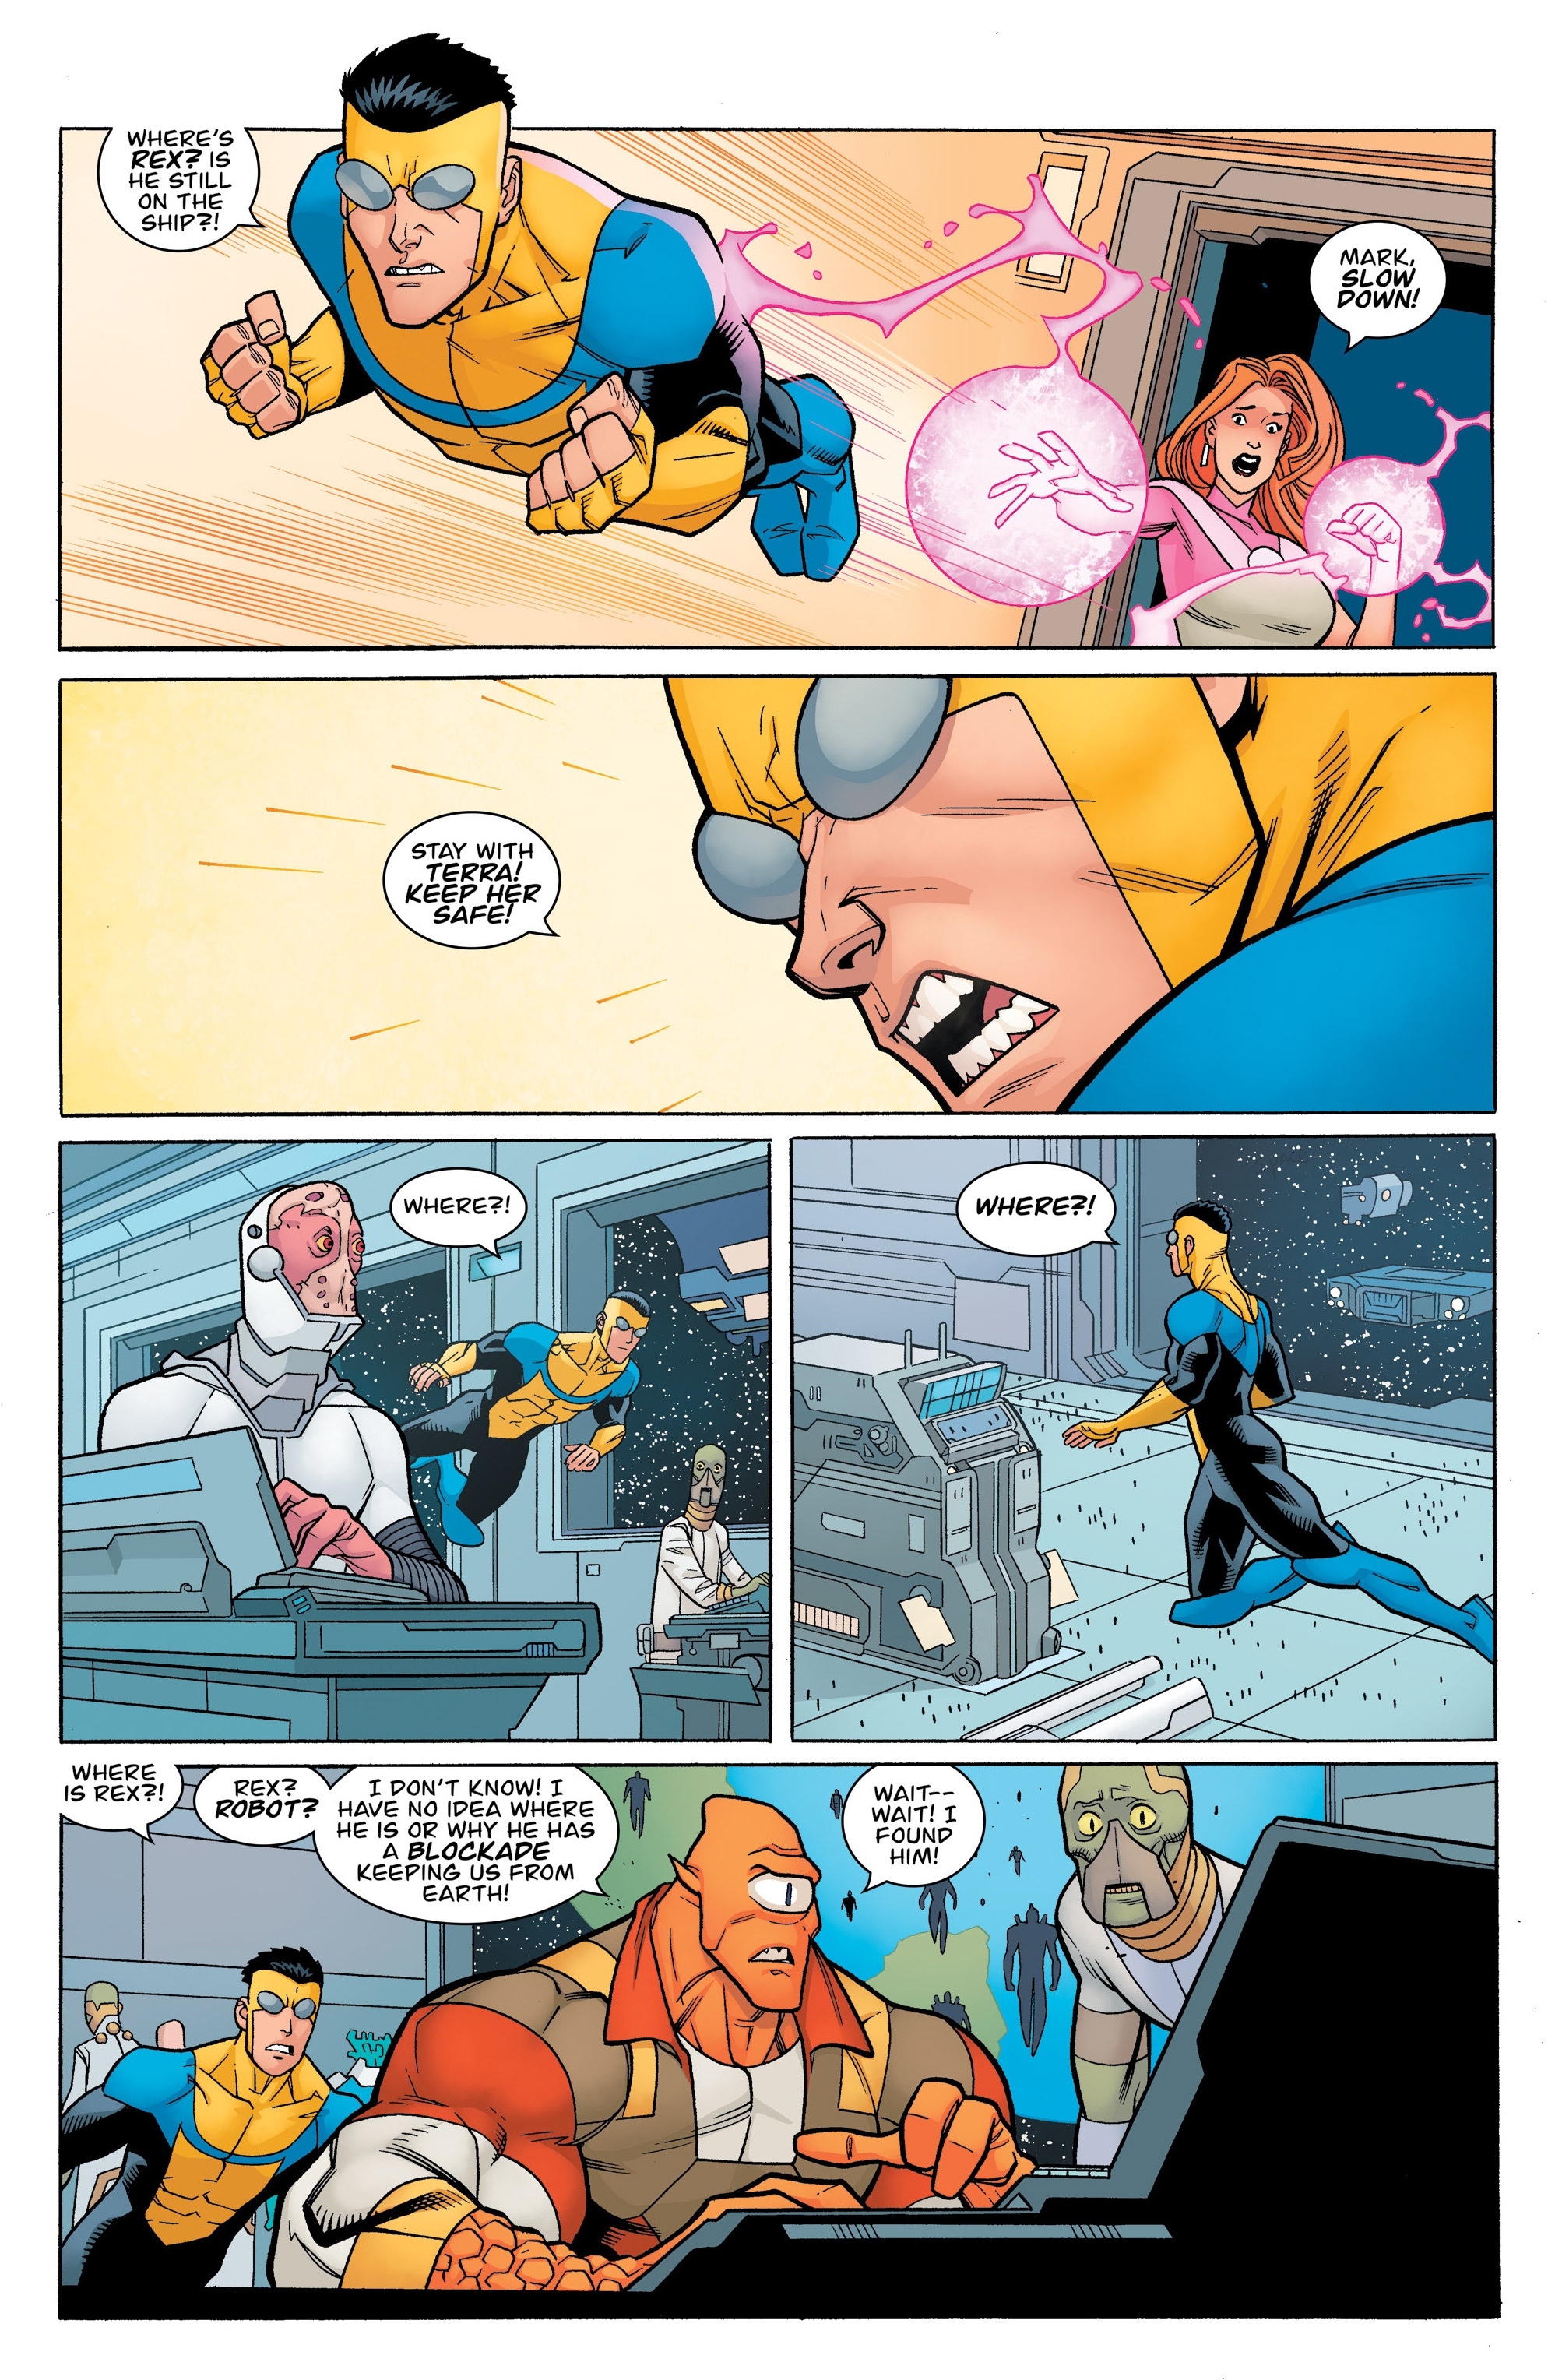 Invincible (2005-): Chapter 142 - Page 3